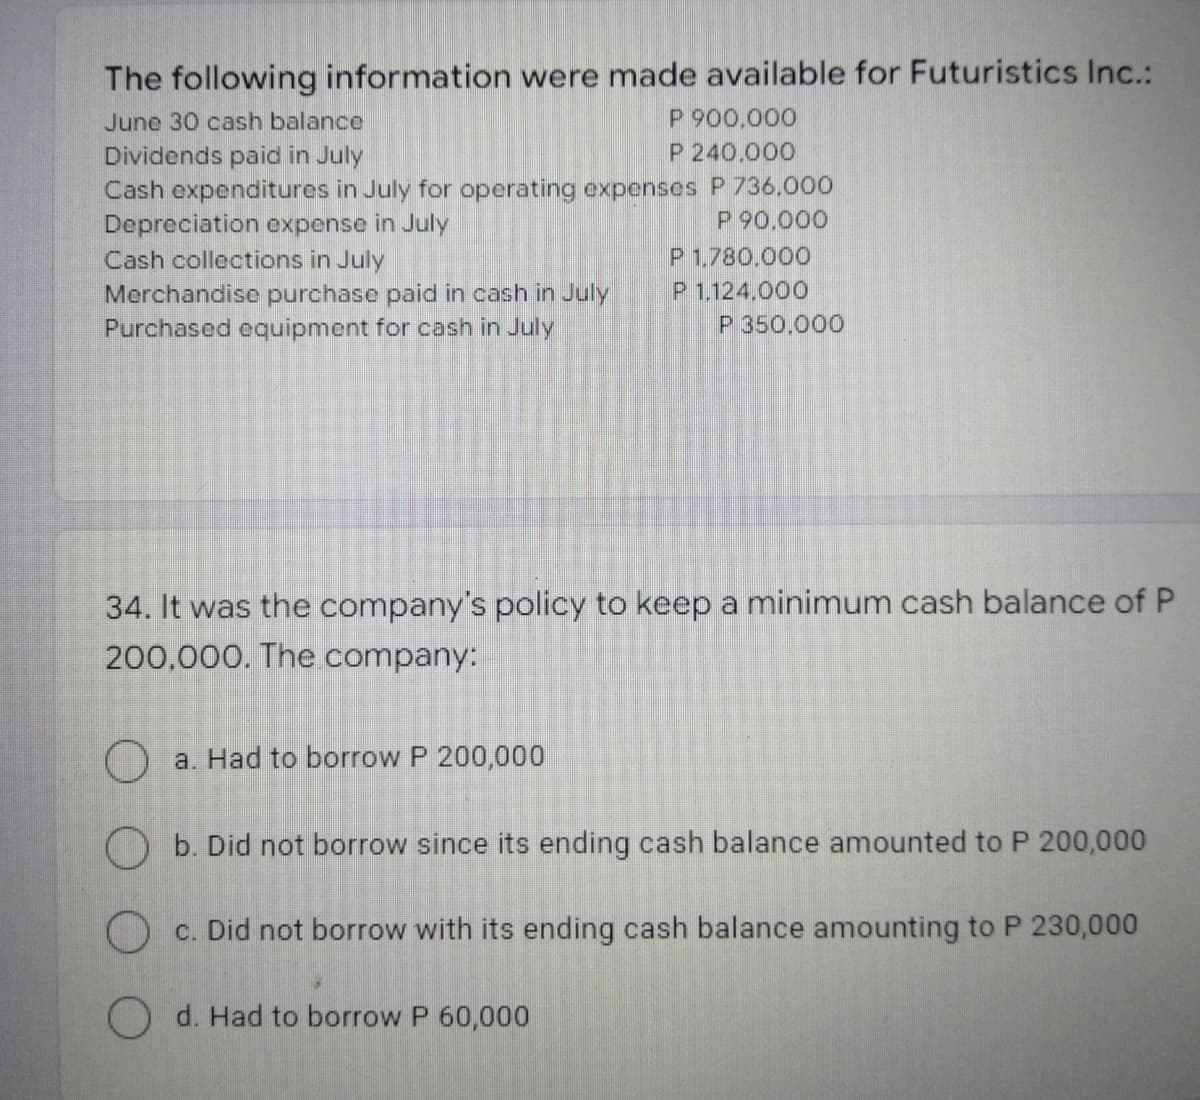 The following information were made available for Futuristics Inc.:
P 900,000
P 240.000
Cash expenditures in July for operating expenses P 736.000
P 90,000
P 1,780.000
P 1.124.000
P 350,000
June 30 cash balance
Dividends paid in July
Depreciation expense in July
Cash collections in July
Merchandise purchase paid in cash in July
Purchased equipment for cash in July
34. It was the company's policy to keep a minimum cash balance of P
200,000. The company:
a. Had to borrow P 200,000
O b. Did not borrow since its ending cash balance amounted to P 200,000
c. Did not borrow with its ending cash balance amounting to P 230,000
O d. Had to borrow P 60,000
